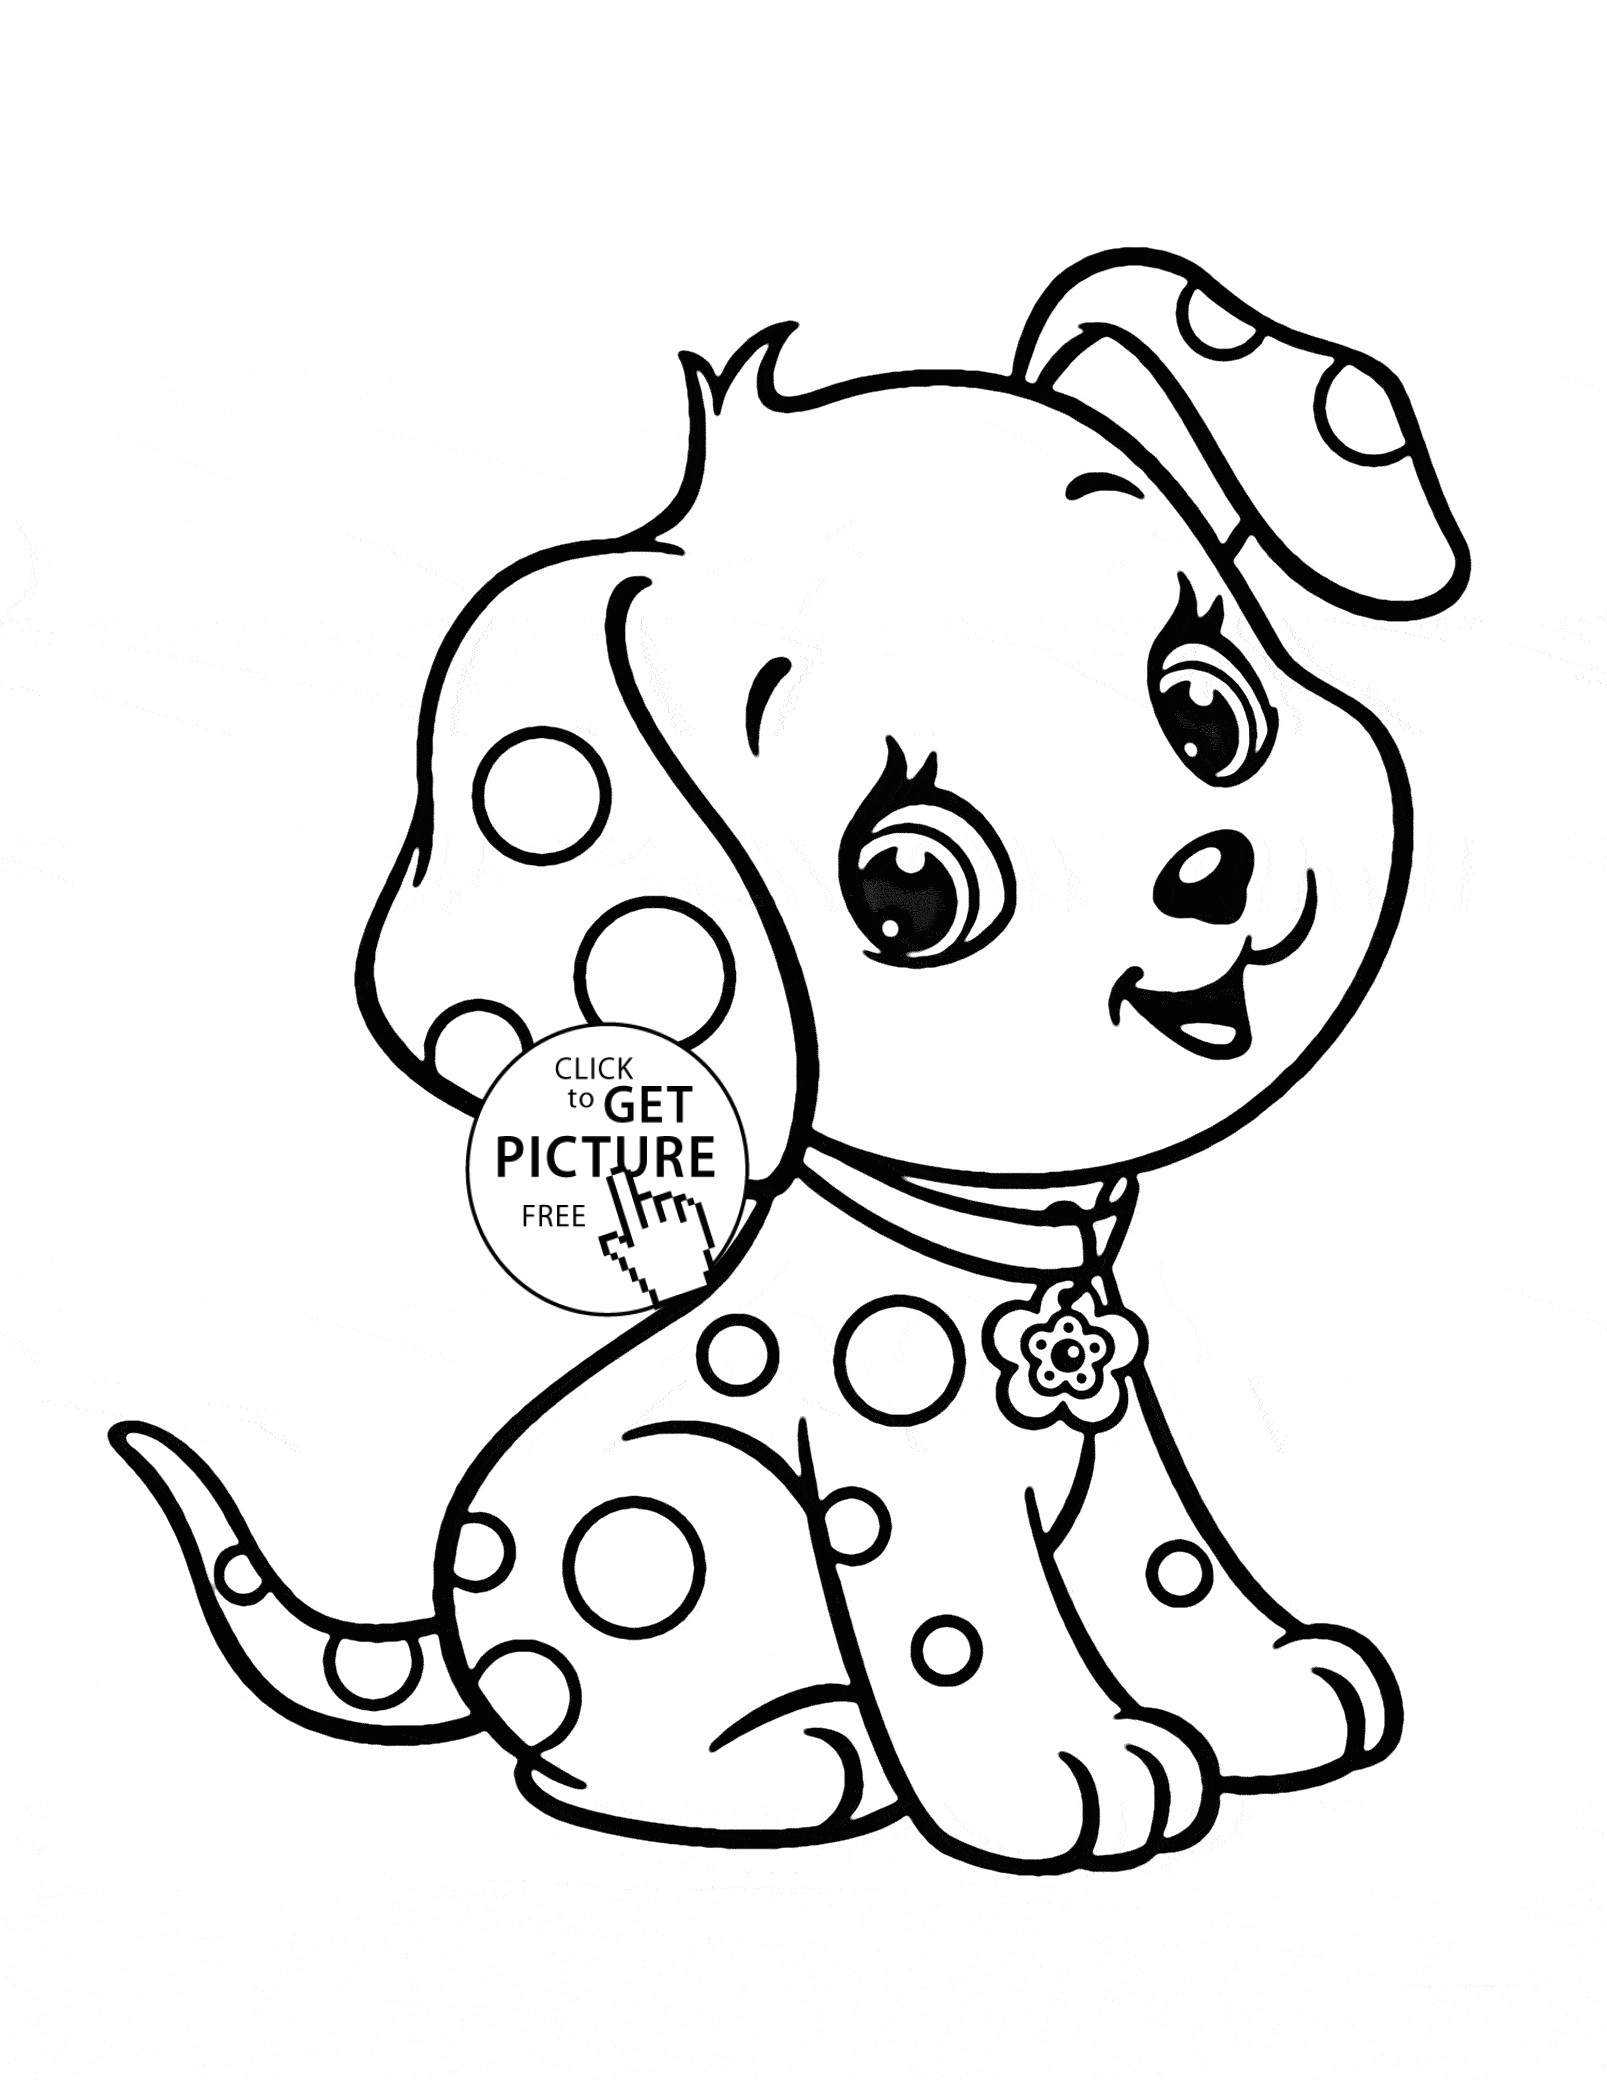 Drawing Dog Logo Excellent Article with Great Ideas About Dogs Dogs Tips